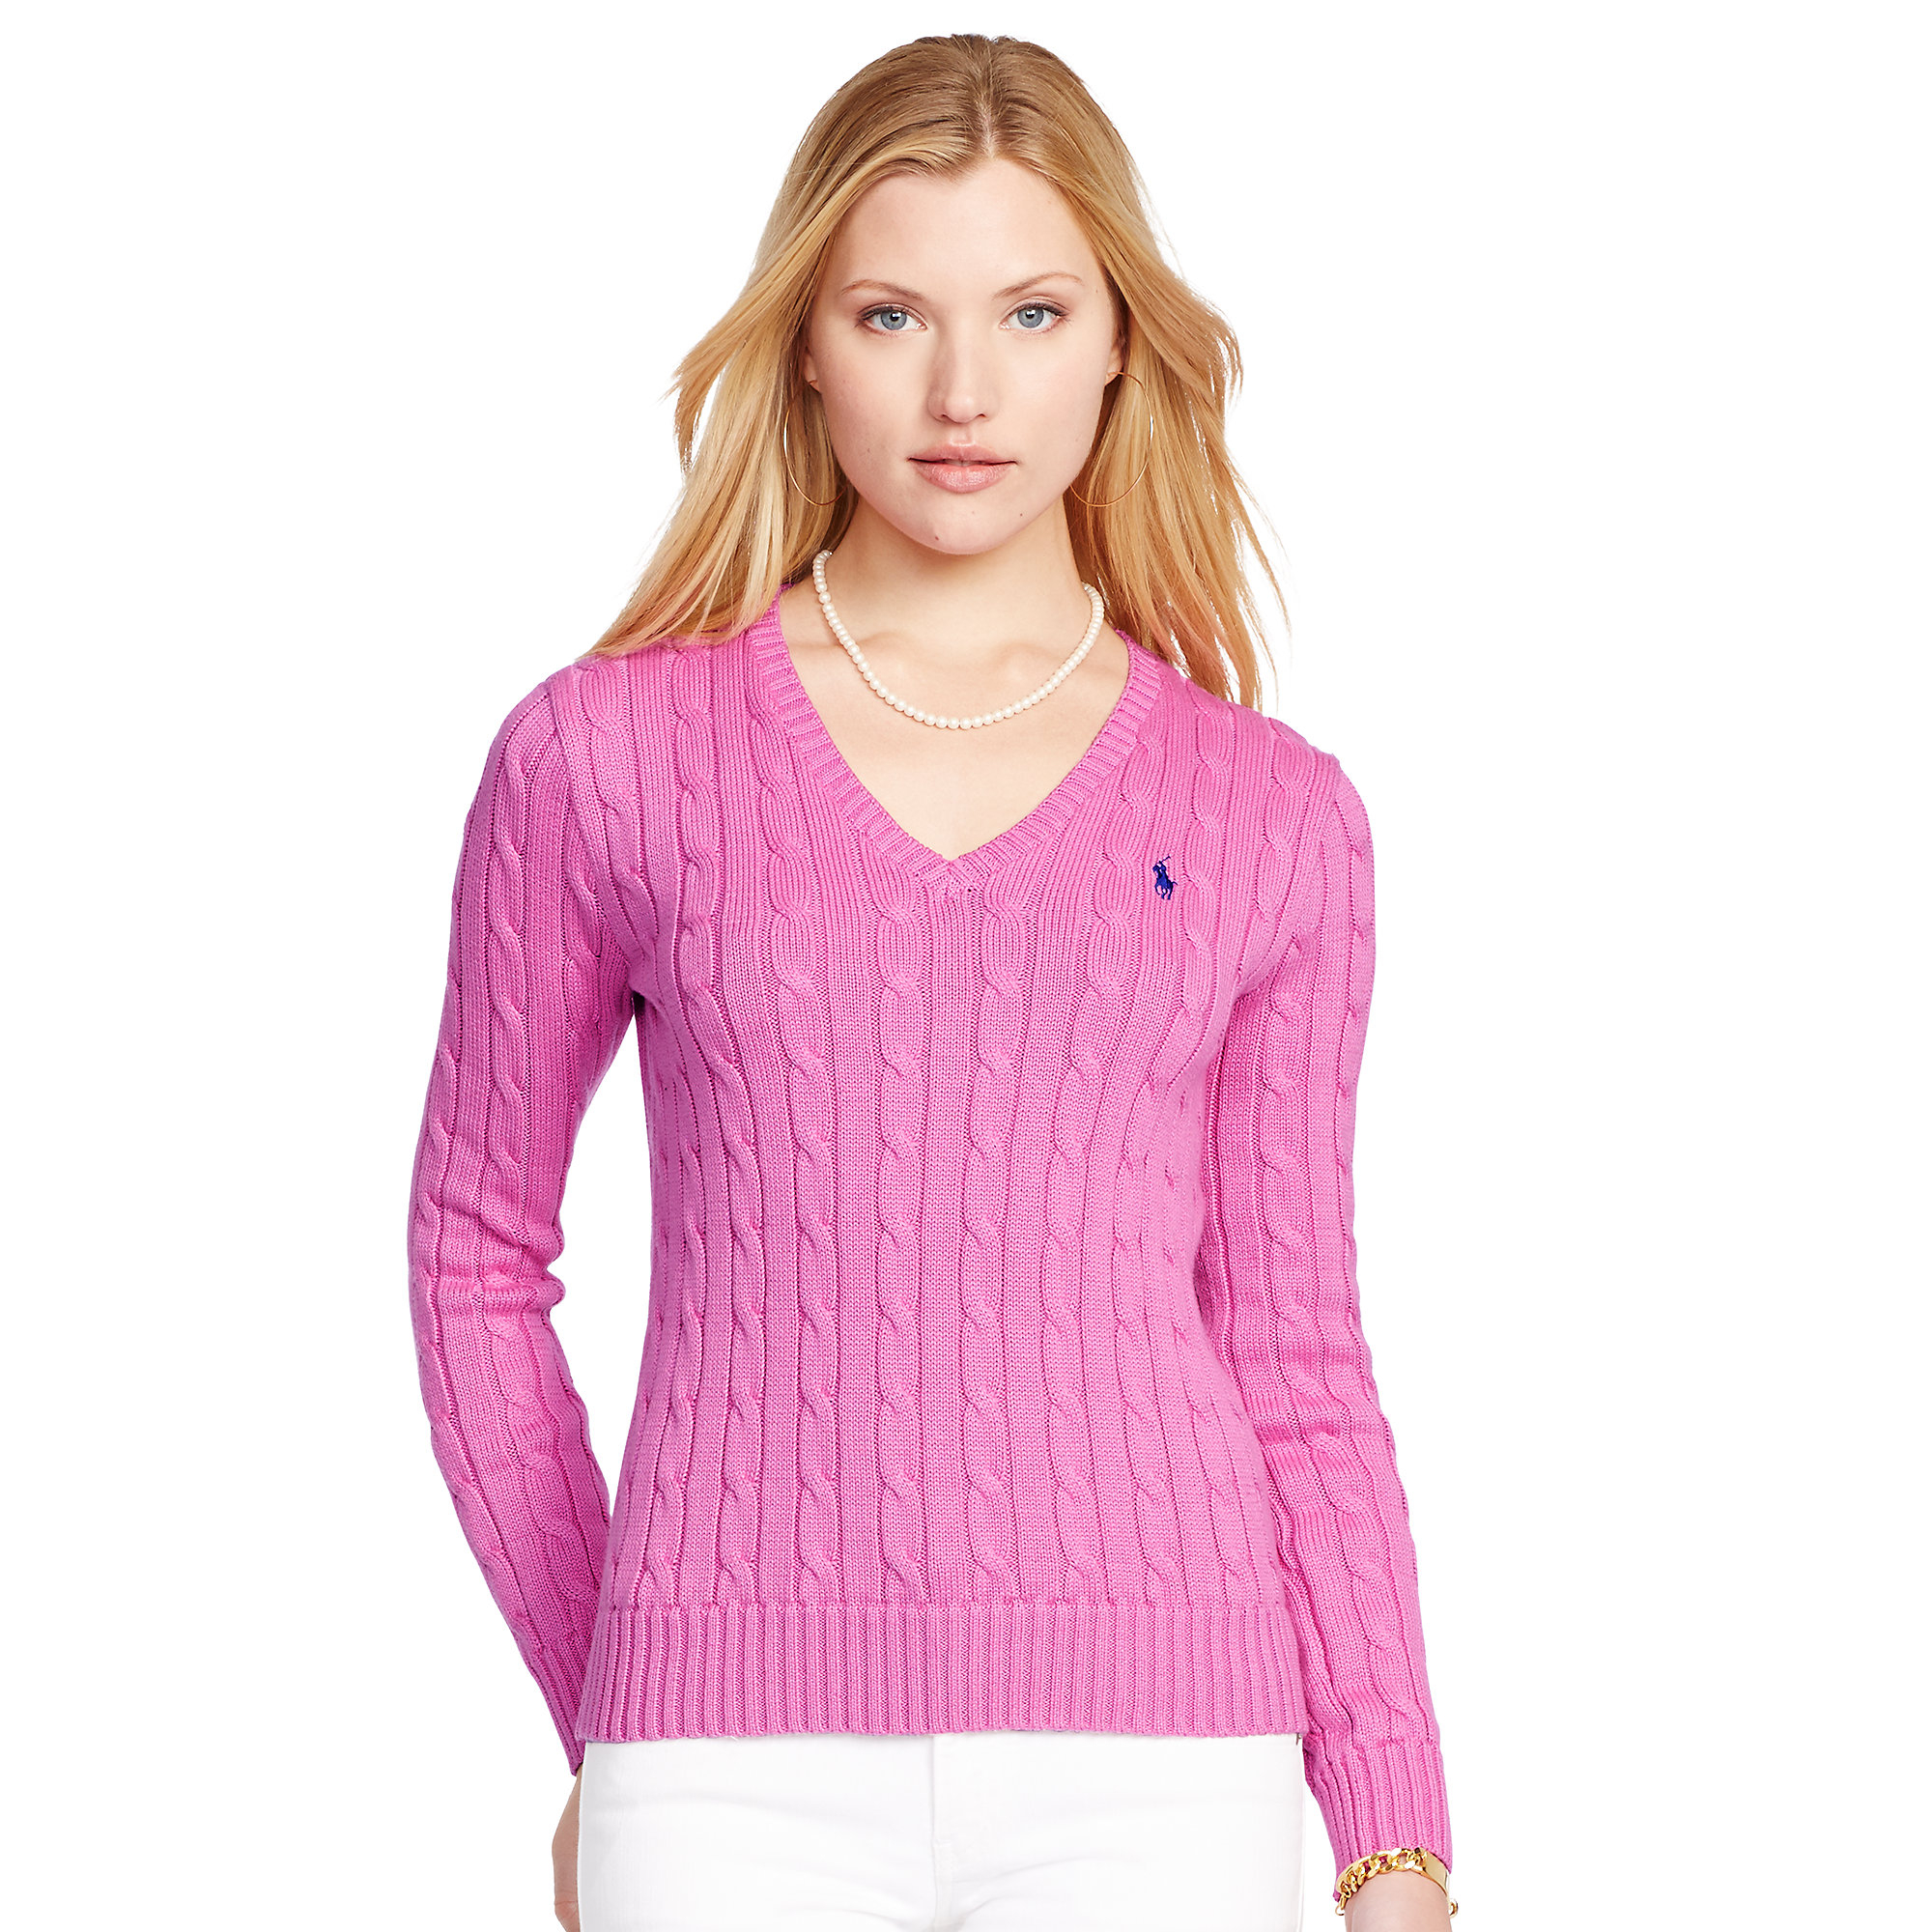 Lyst - Polo Ralph Lauren Cabled Cotton V-Neck Sweater in Pink